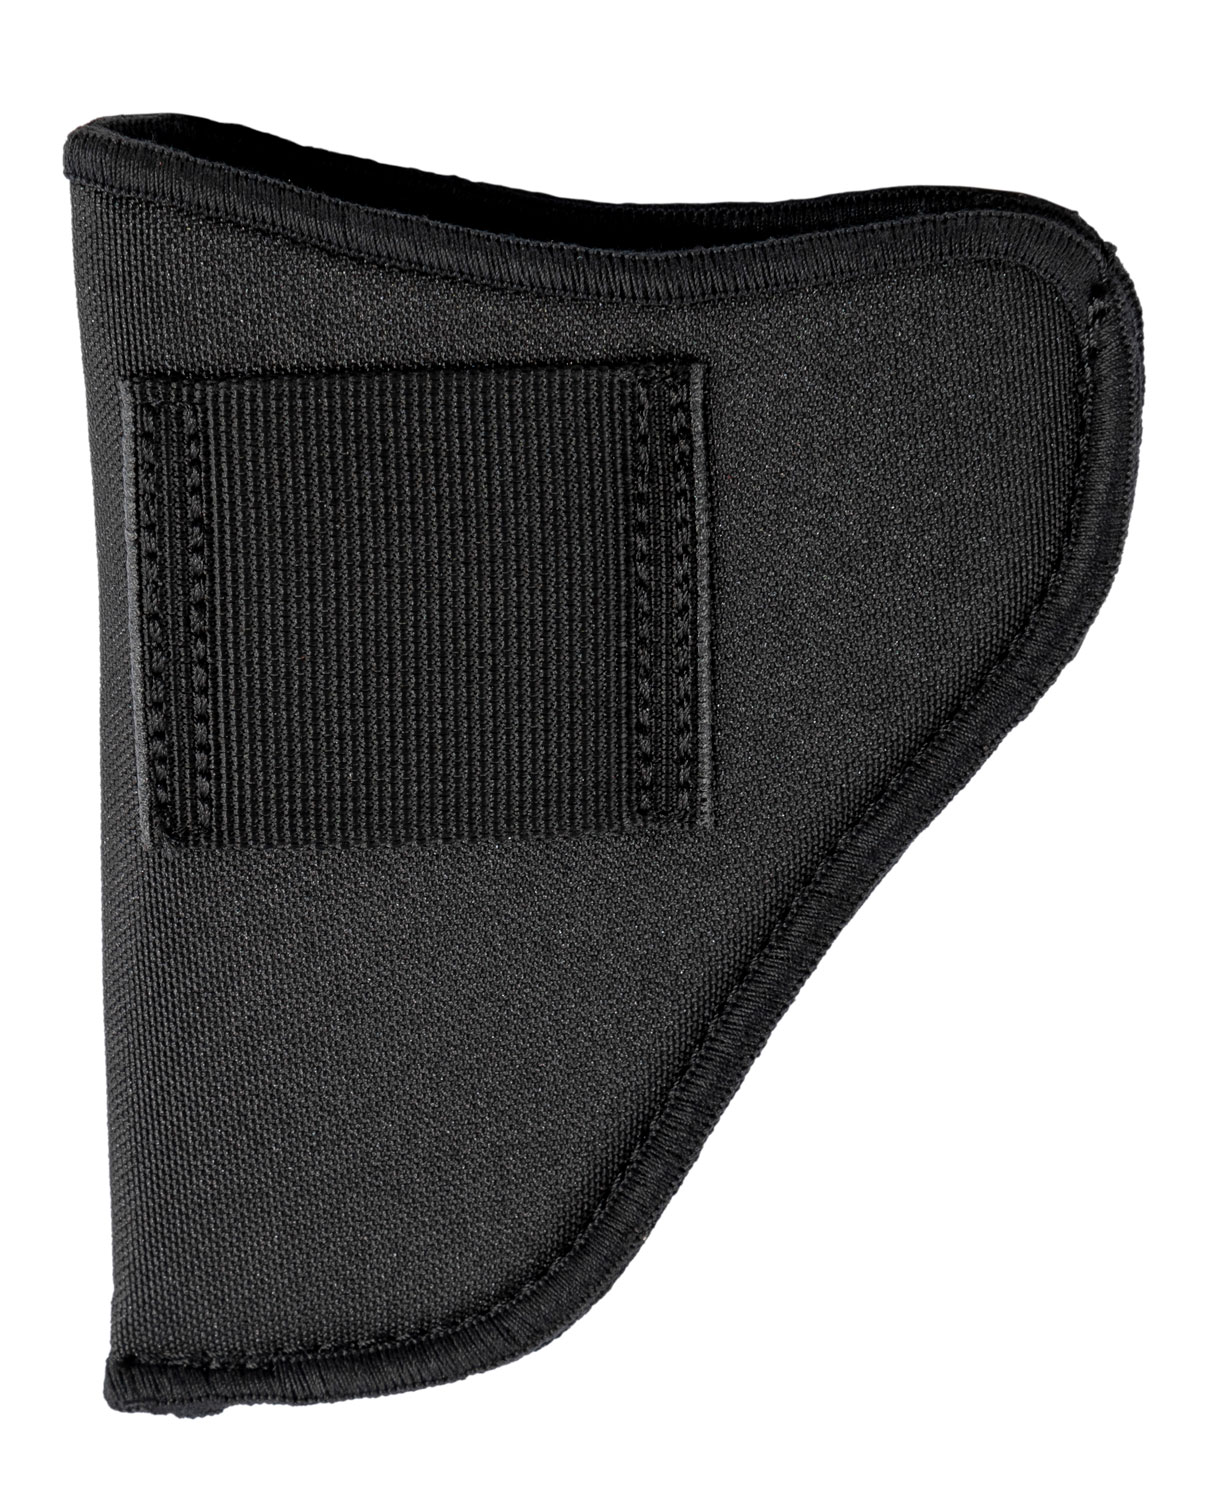 Uncle Mikes 21110 GunMate Hip Holster Size 10 made of Tri-Laminate with Black Finish & Belt Loop Mount Type fits Up to 4